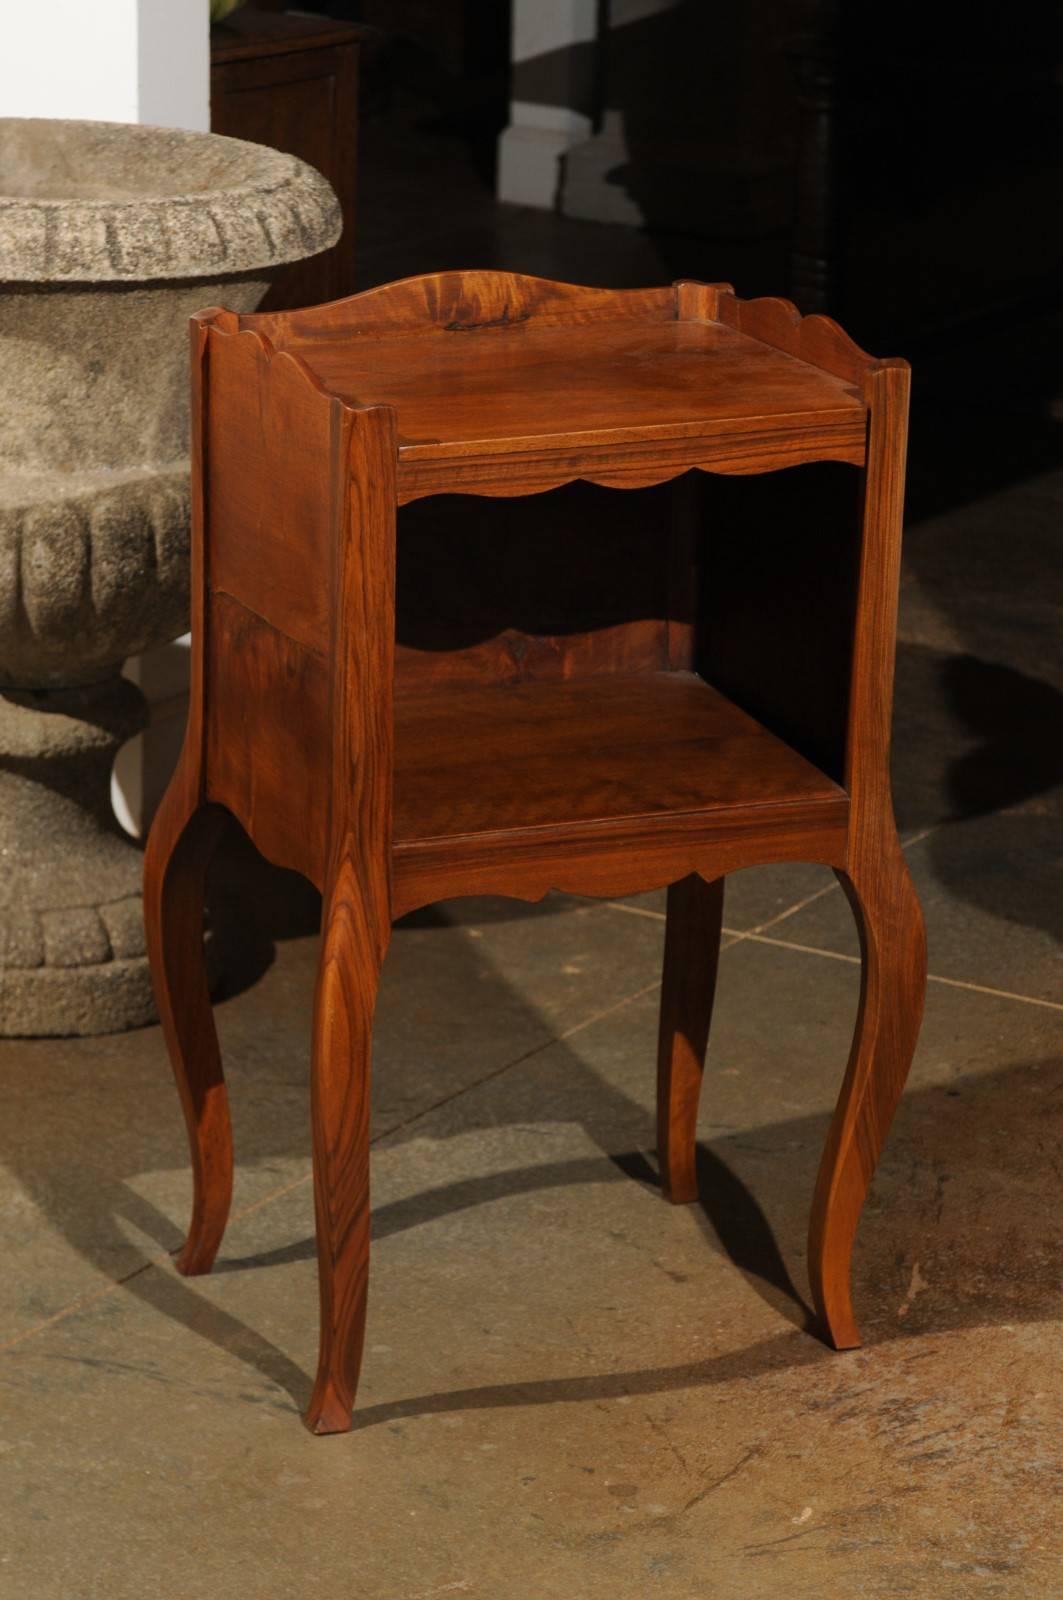 A French Louis XV style 19th century wooden bedside table with three-quarter gallery, open shelf and cabriole legs. This French Louis XV style 'table de chevet' features a rectangular top surrounded by a three-quarter gallery, sitting above an open